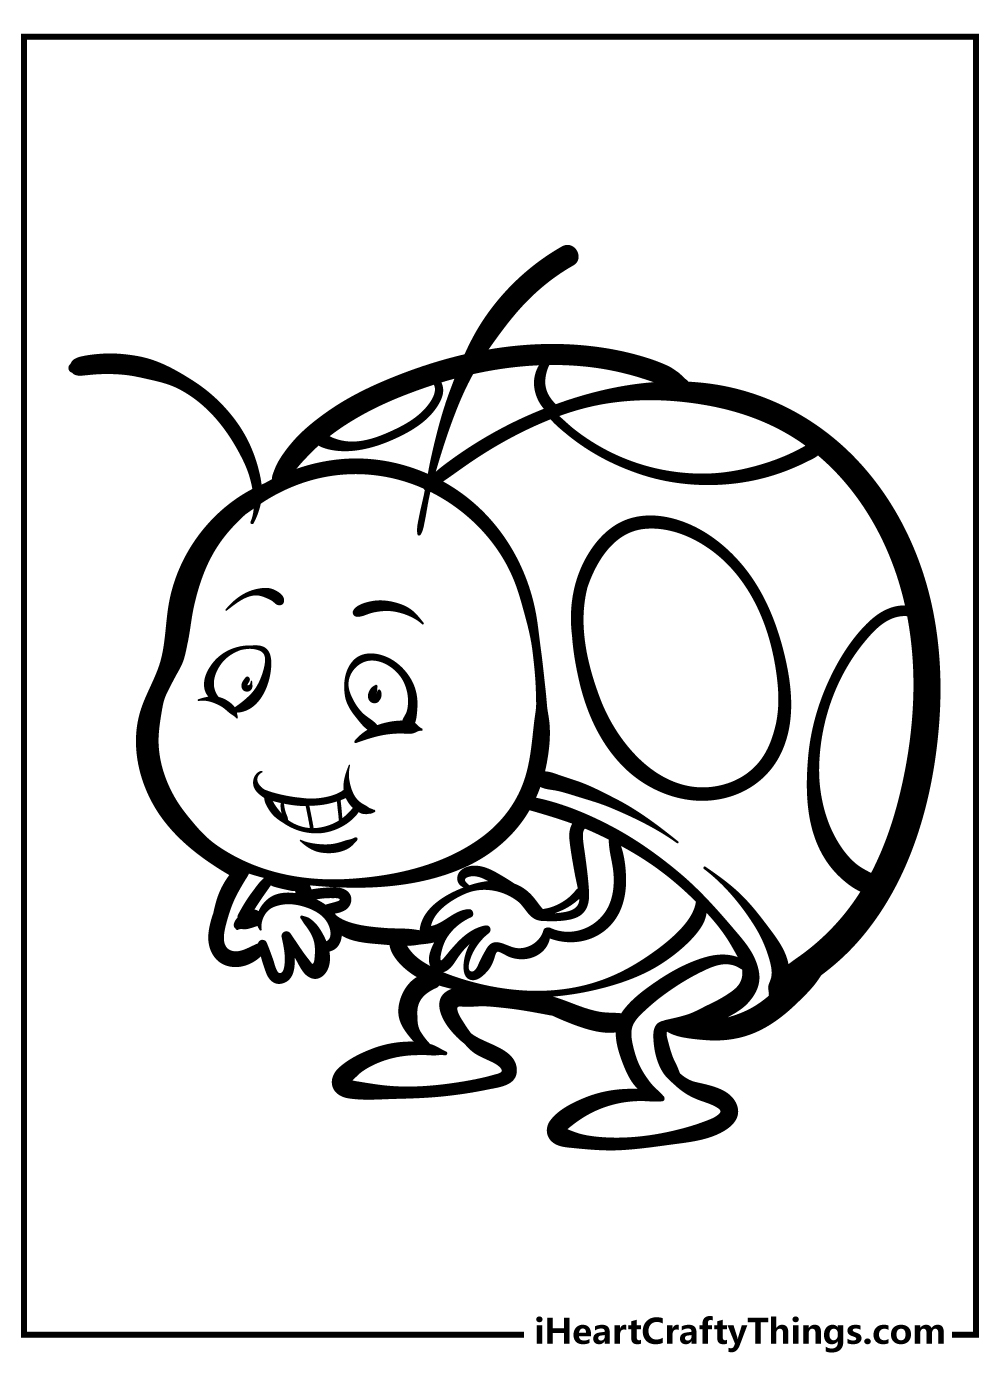 Ladybug Coloring Pages for preschoolers free printable